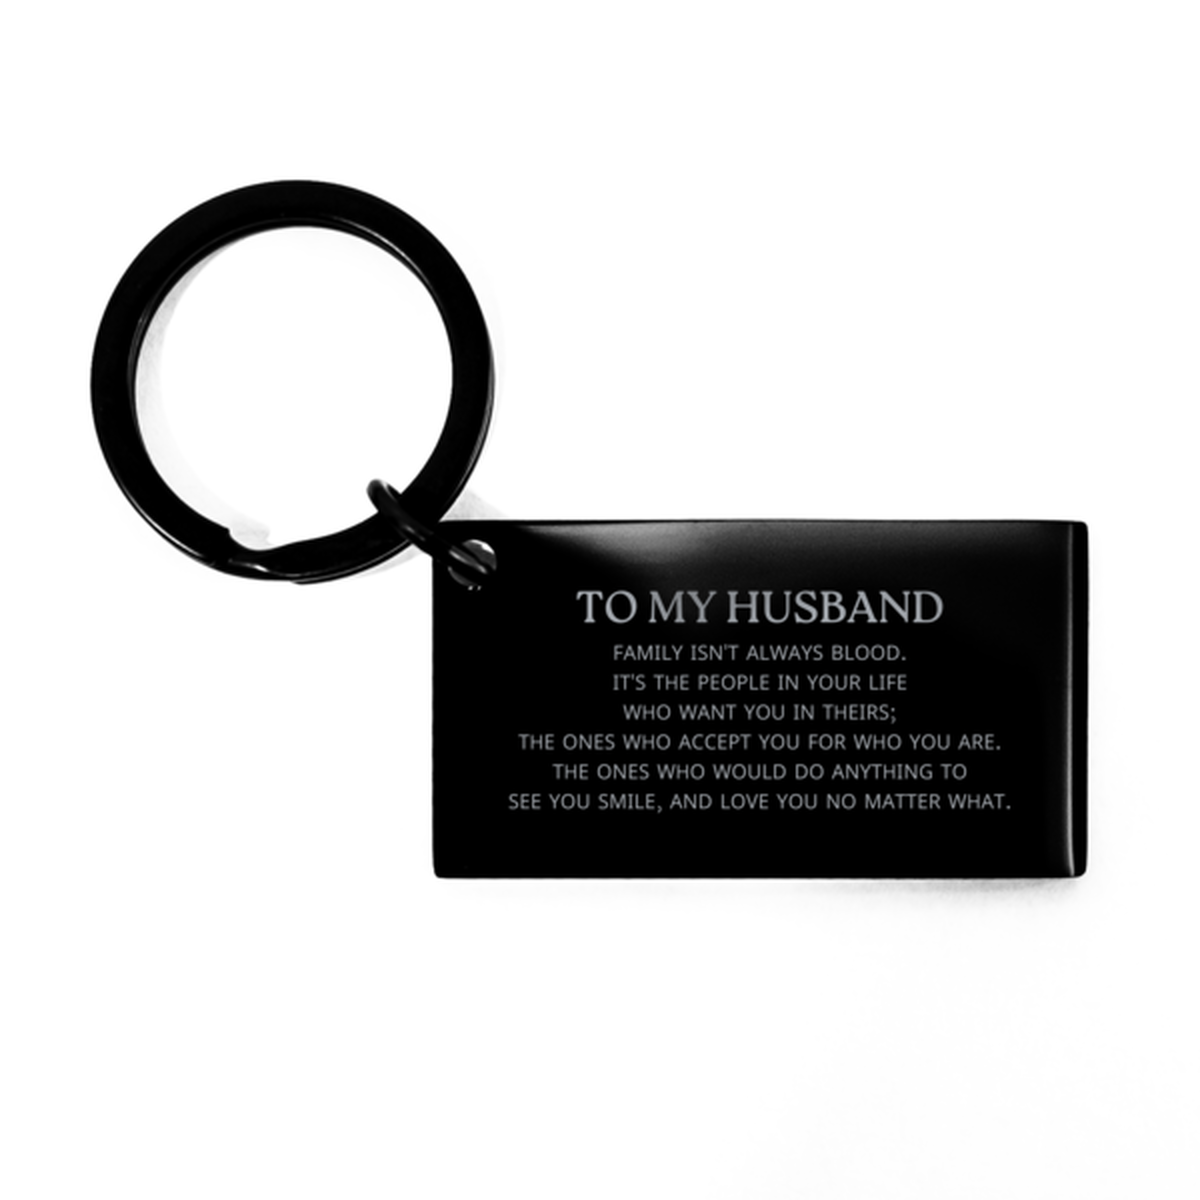 To My Husband Gifts, Family isn't always blood, Husband Keychain, Birthday Christmas Unique Present For Husband